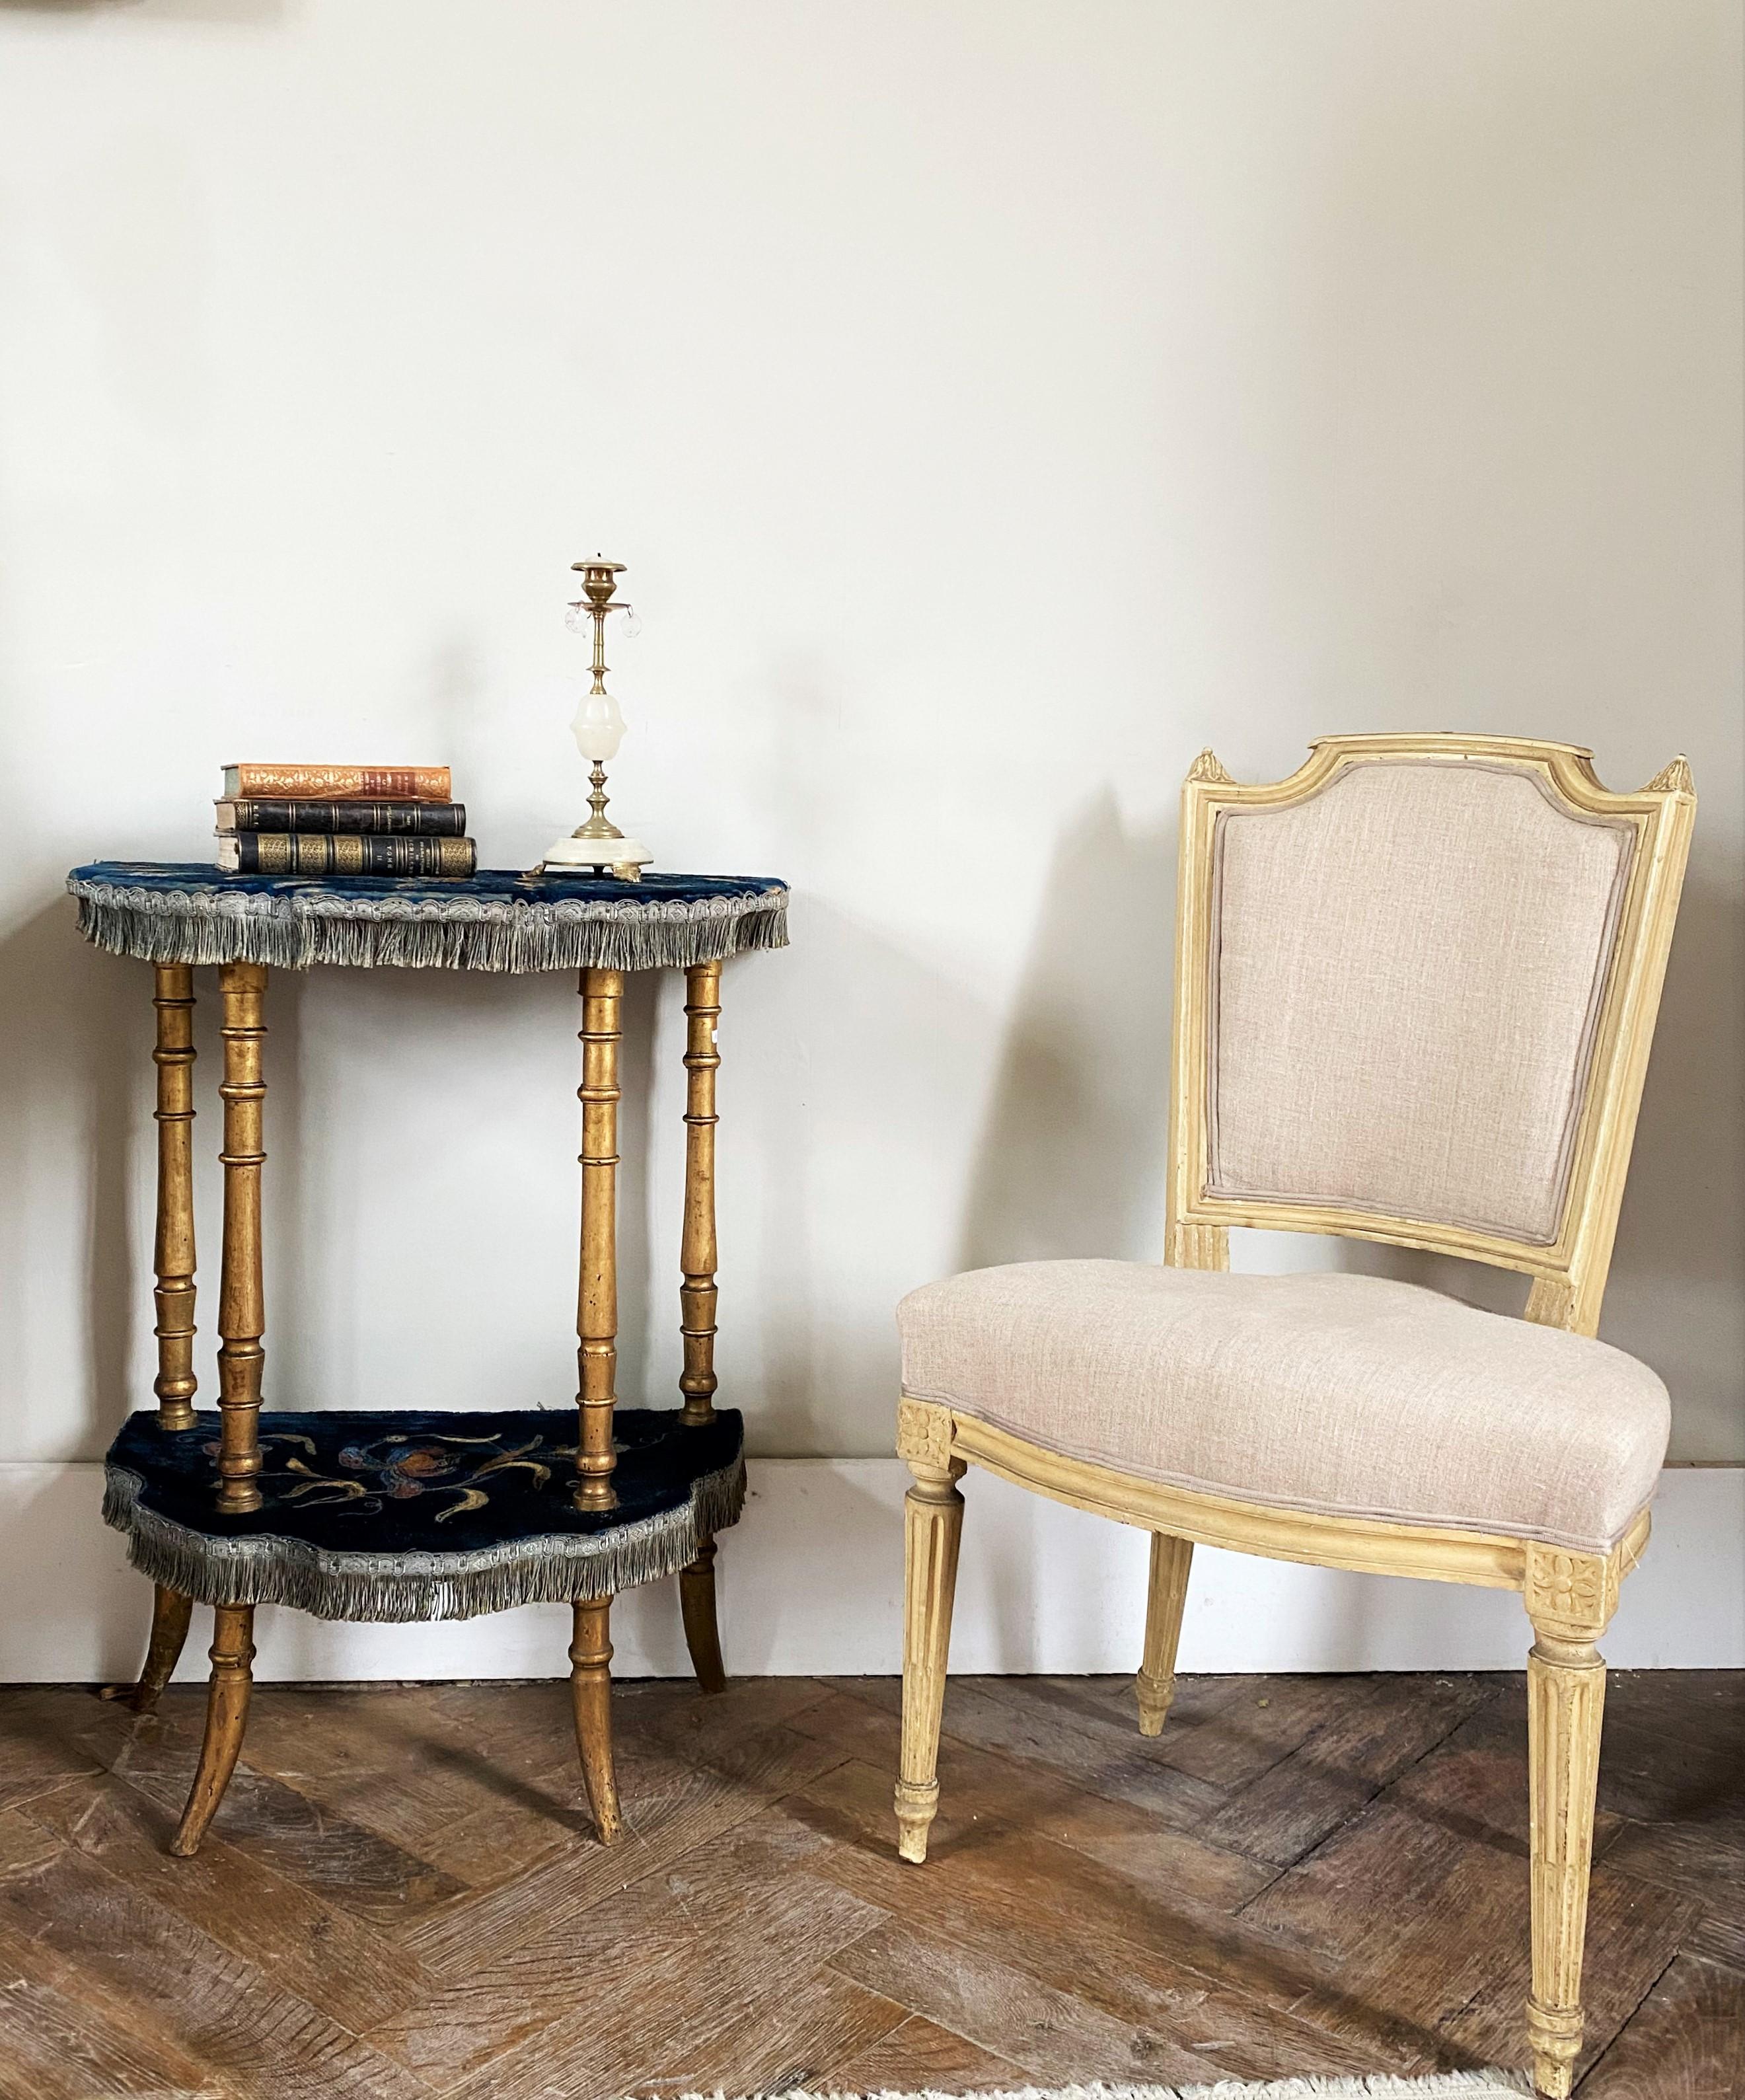 Demi-Lune Console Napoleon III Period Gilded Wood and Royal Bleu Velvet For Sale 3